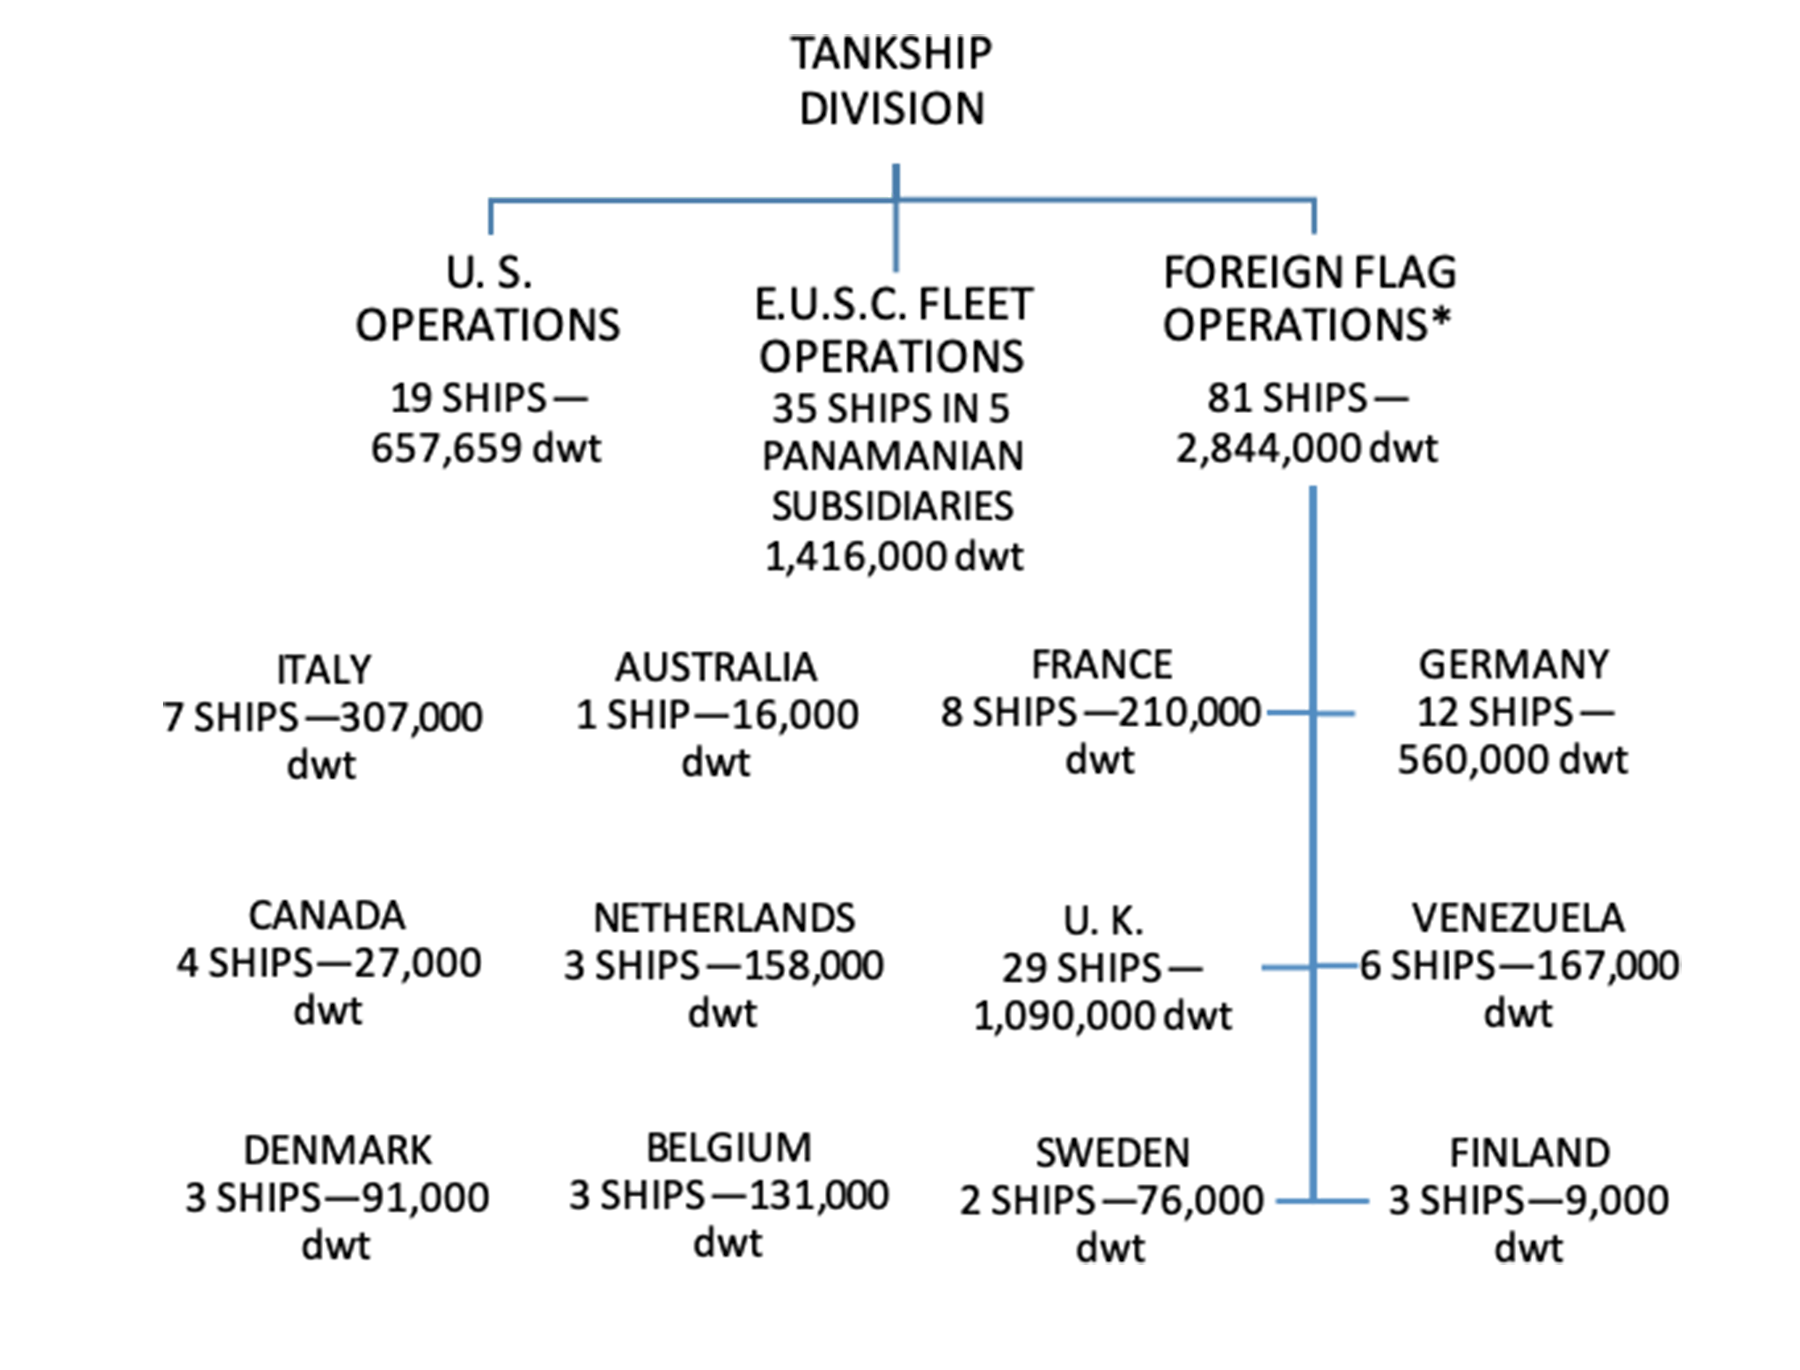 Operational Grouping Structure of Standard Oil Company of Newjersey